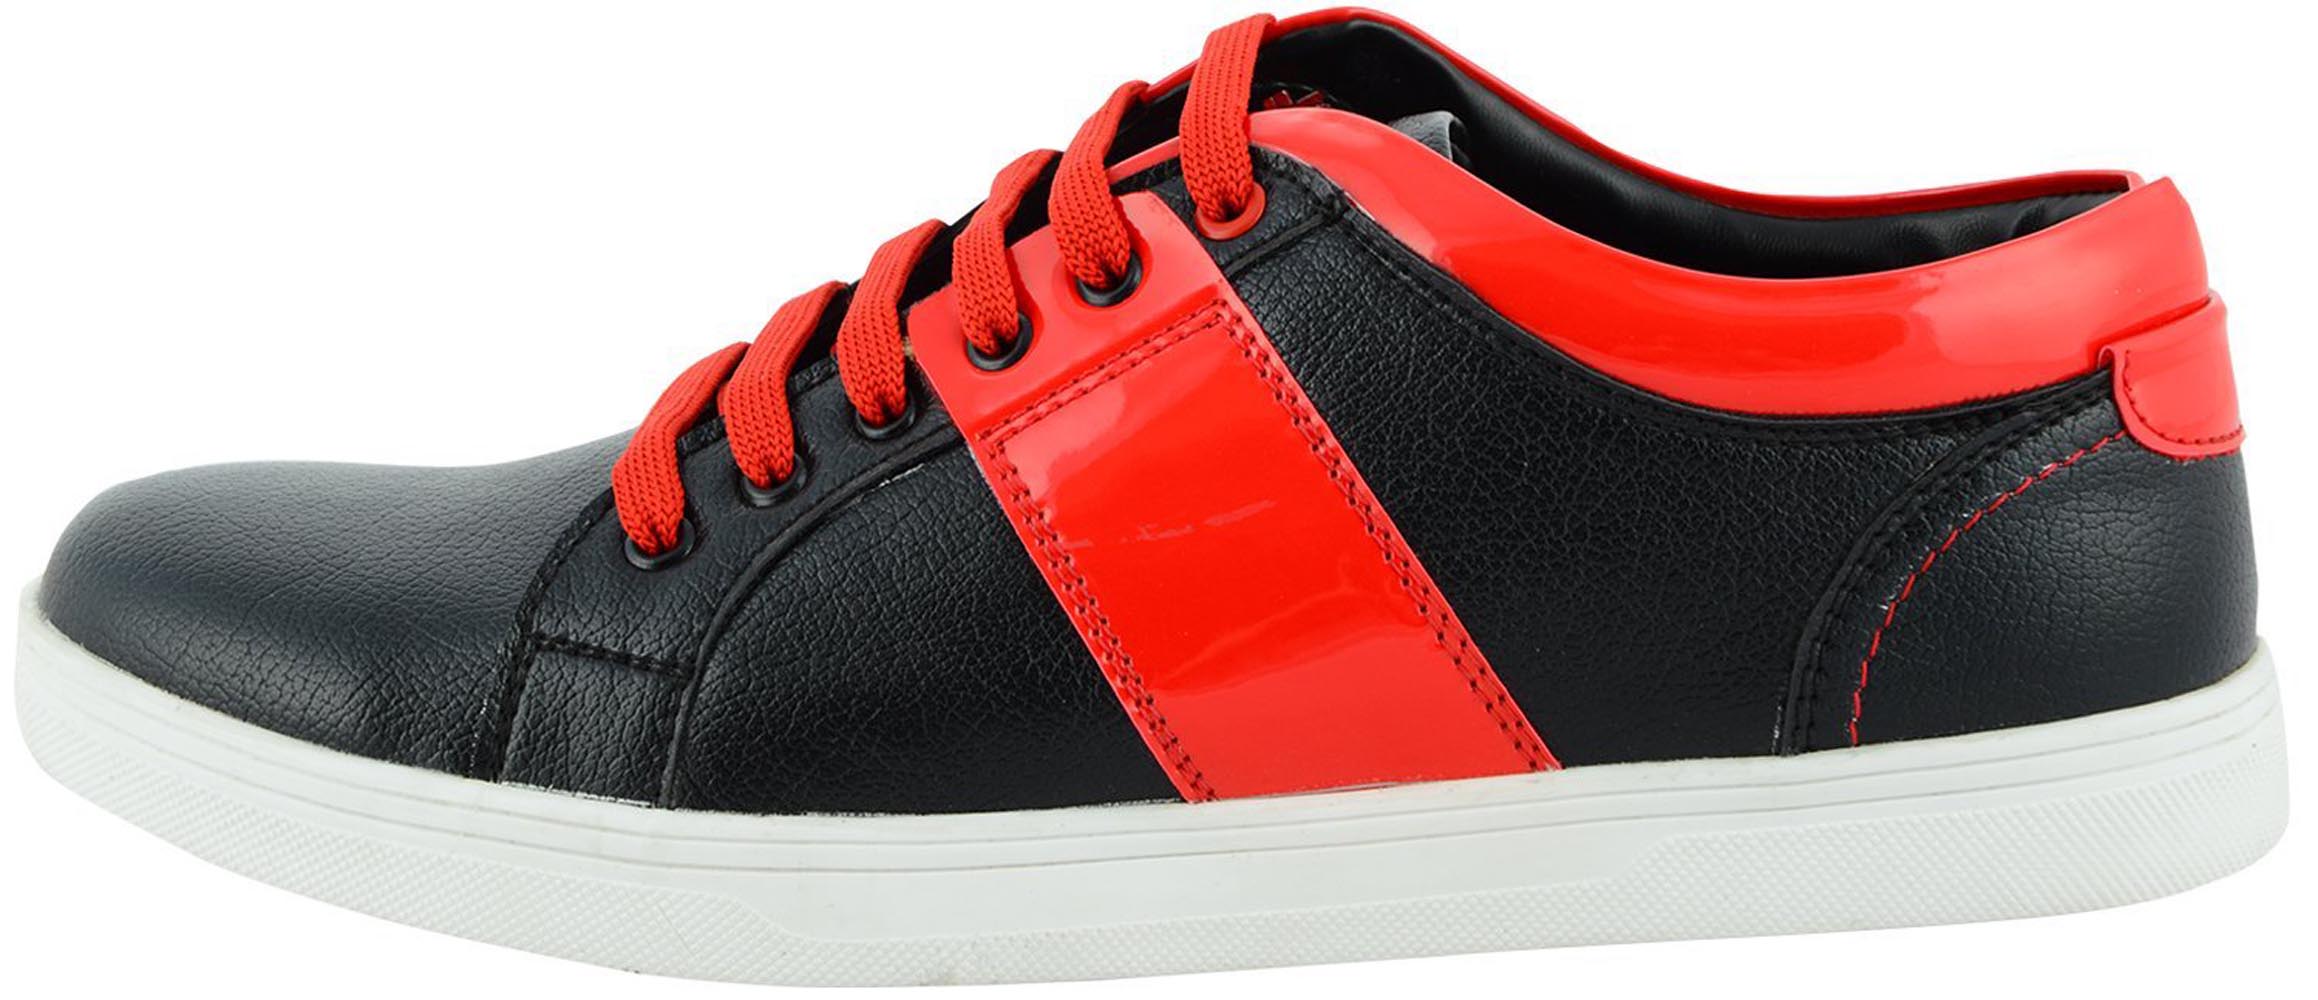 Buy Footgear Mens Casual Shoes (M-CA-4-Red) Online @ ₹1999 from ShopClues